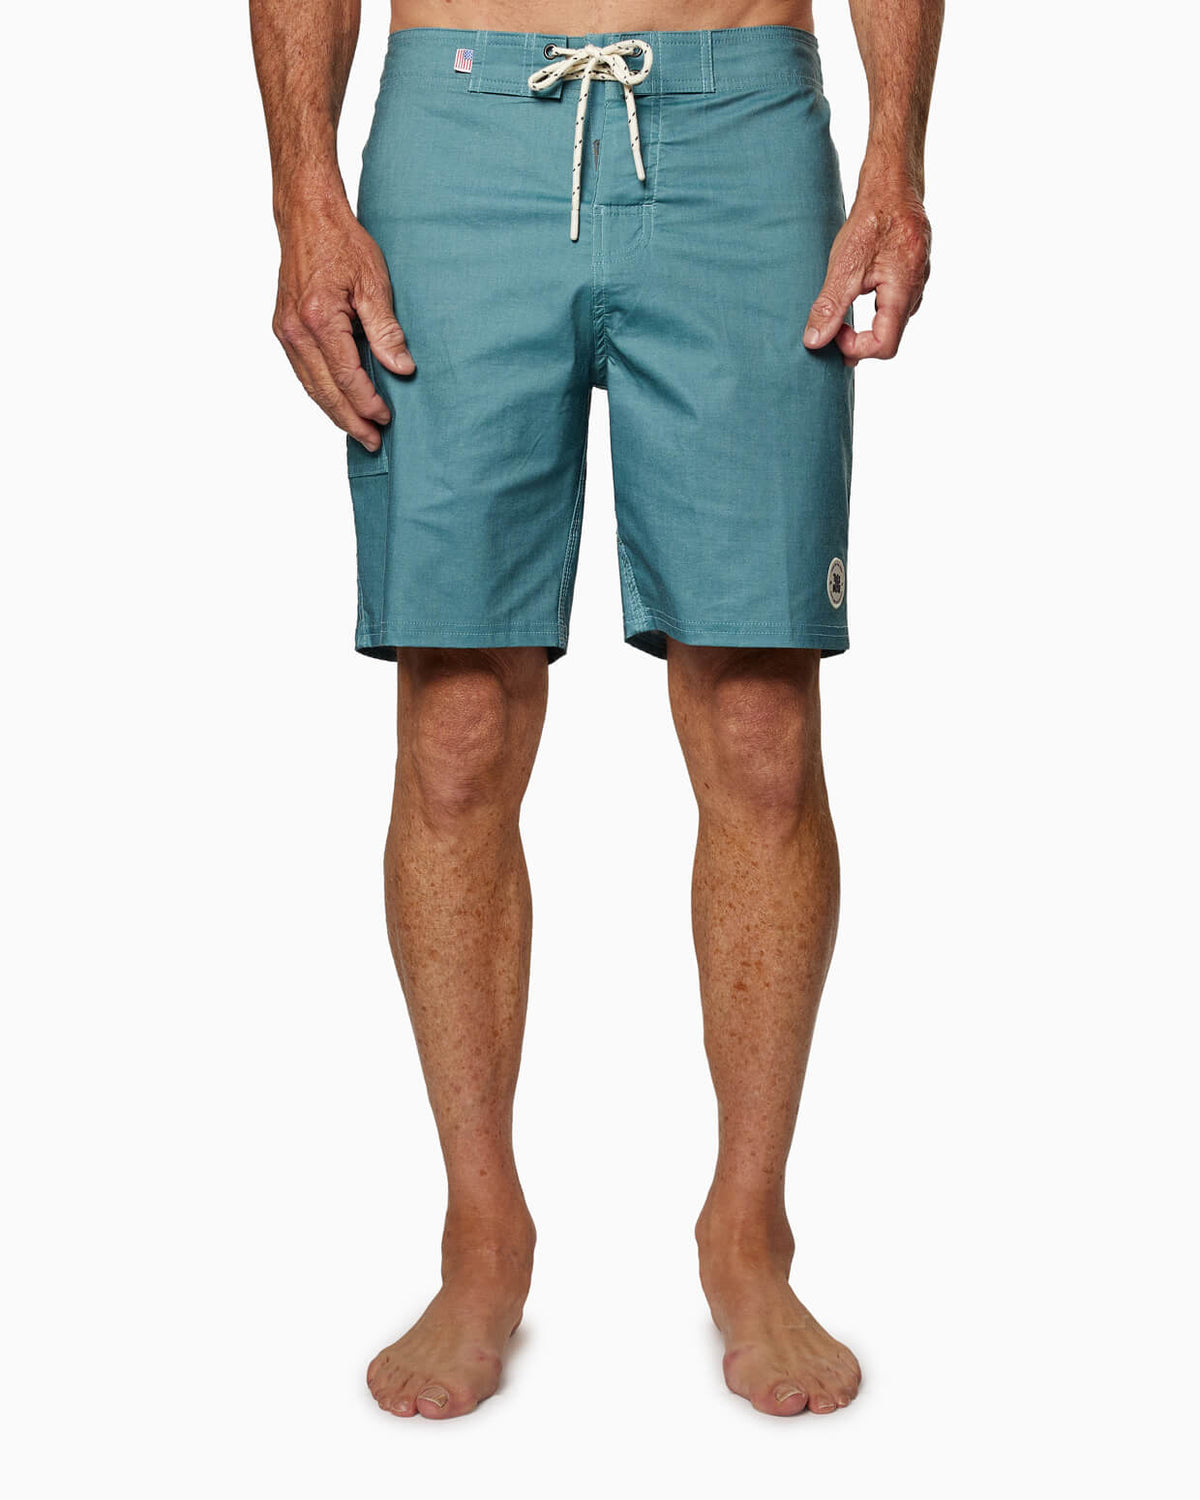 Session Boardshort | Sixty One Collection SESSION SEA BLUE front #color_session sea blue